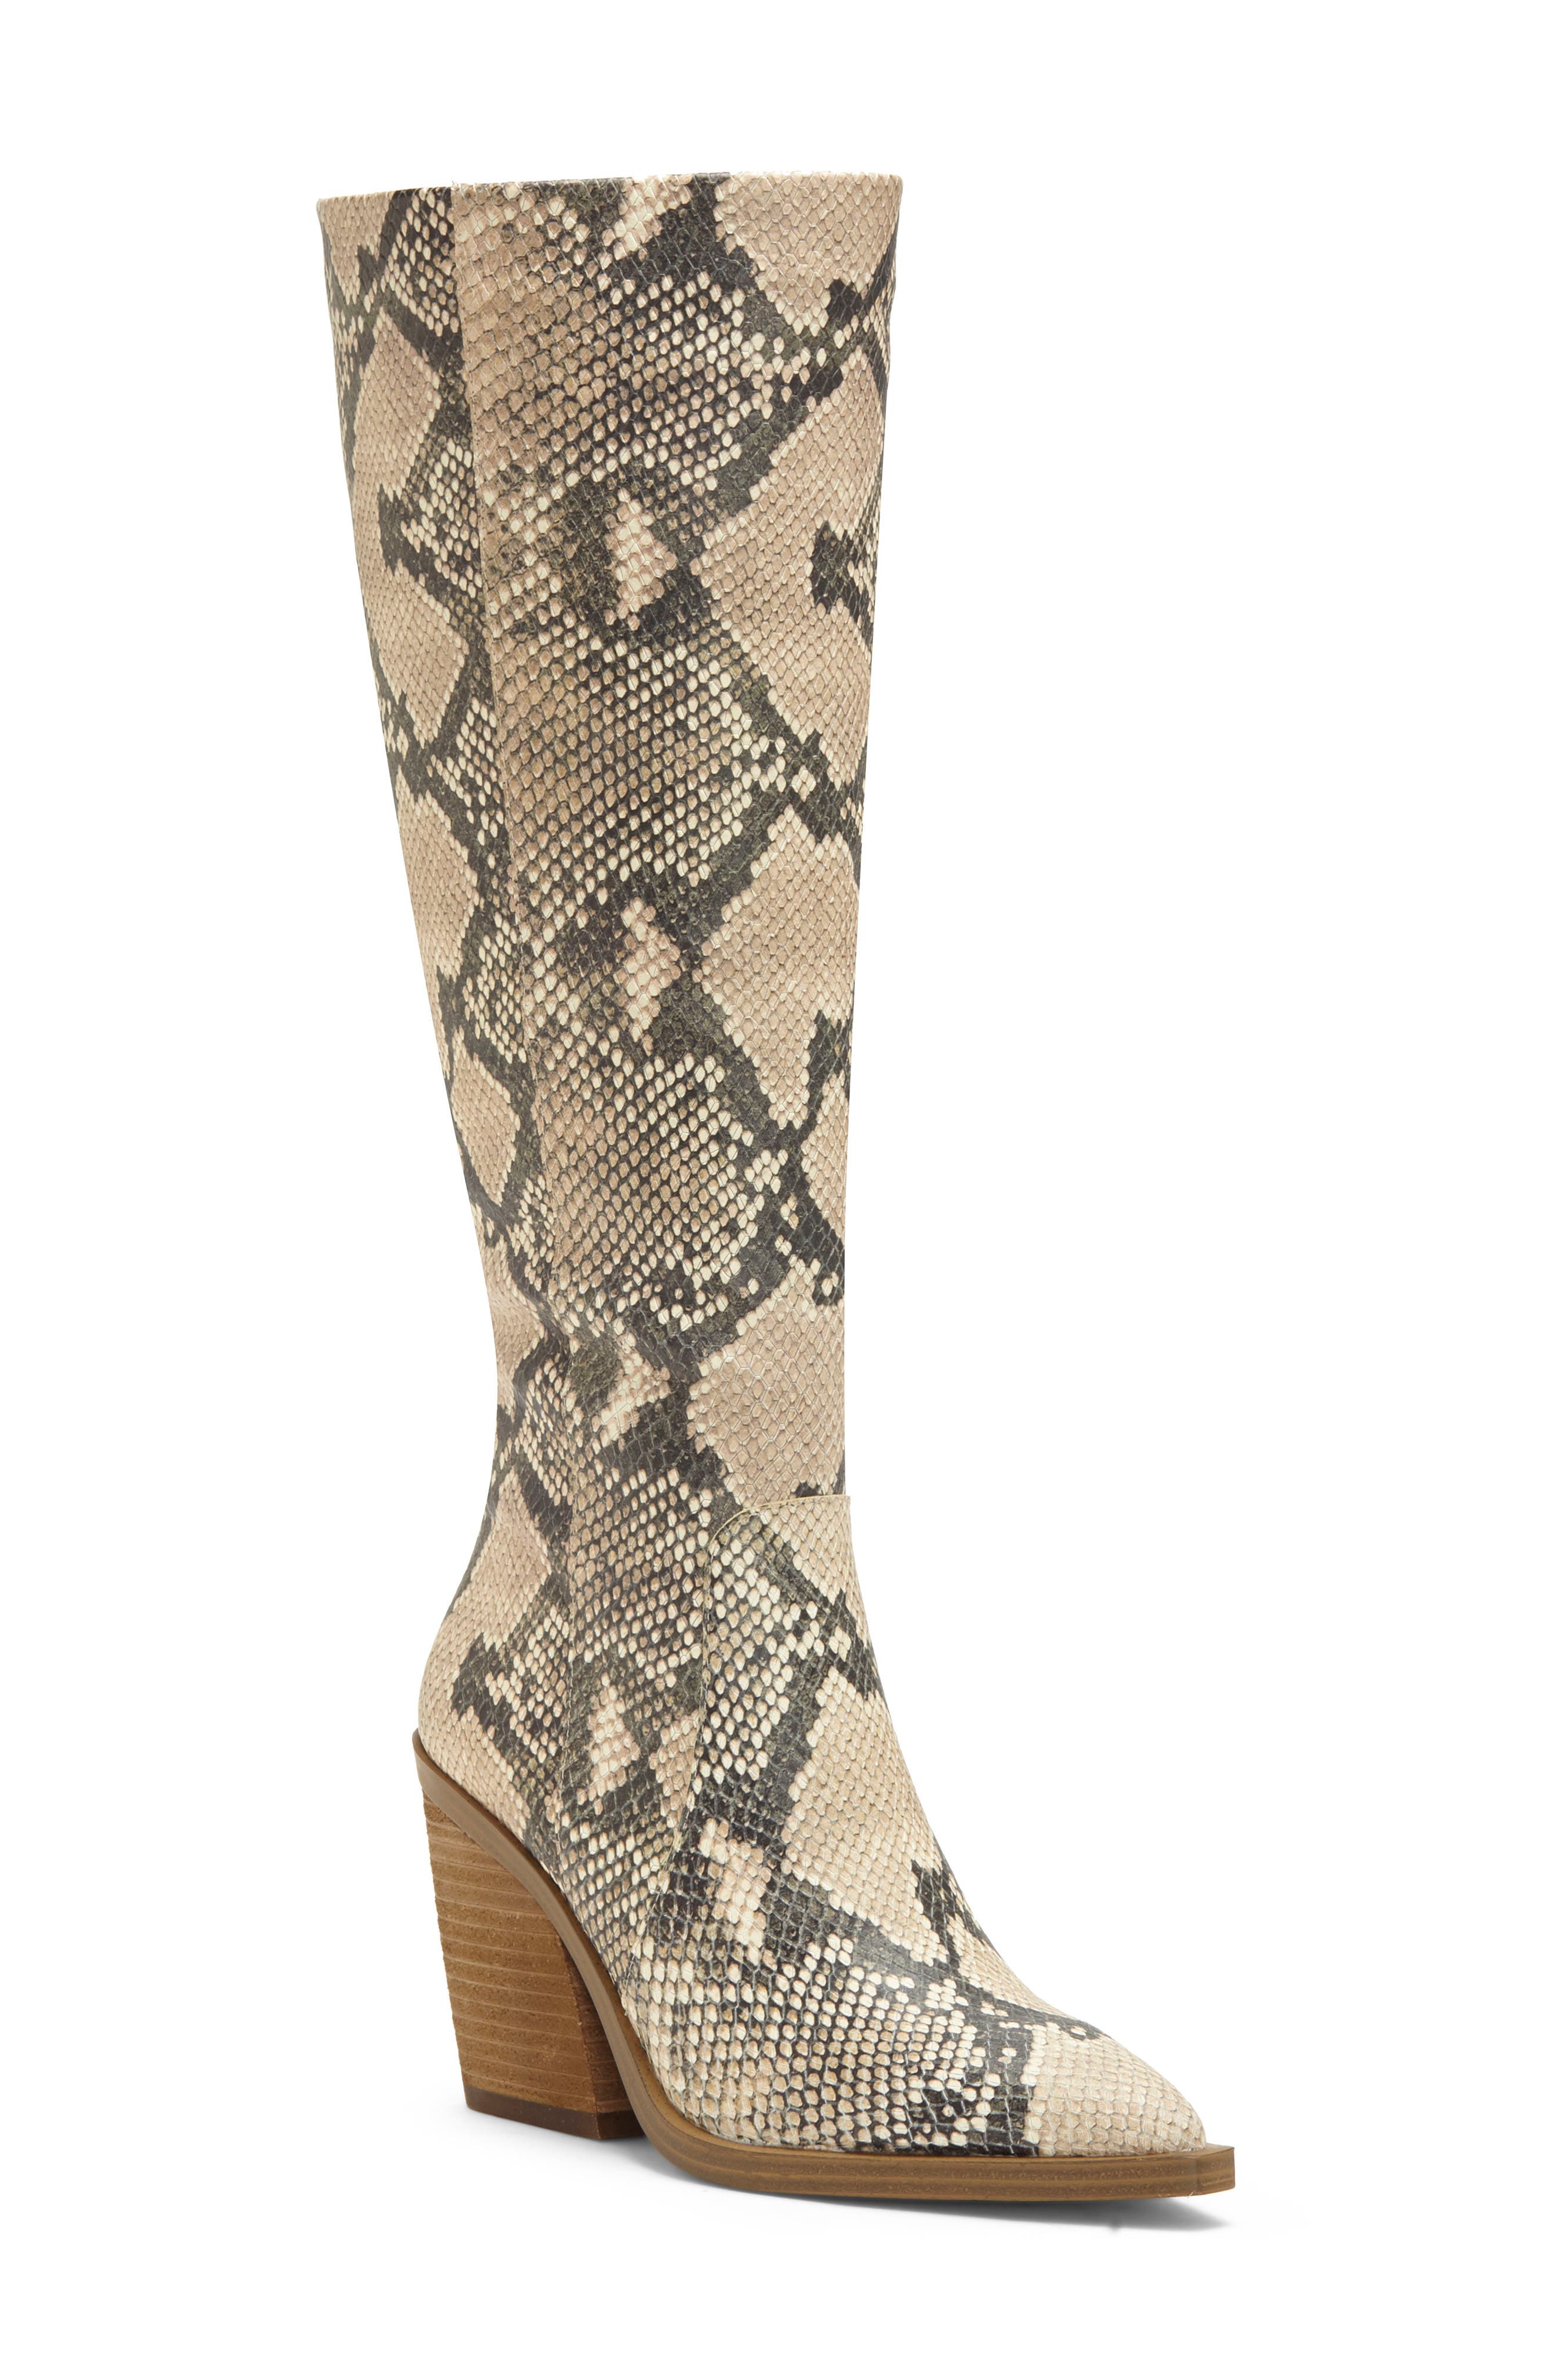 vince camuto knee high boots